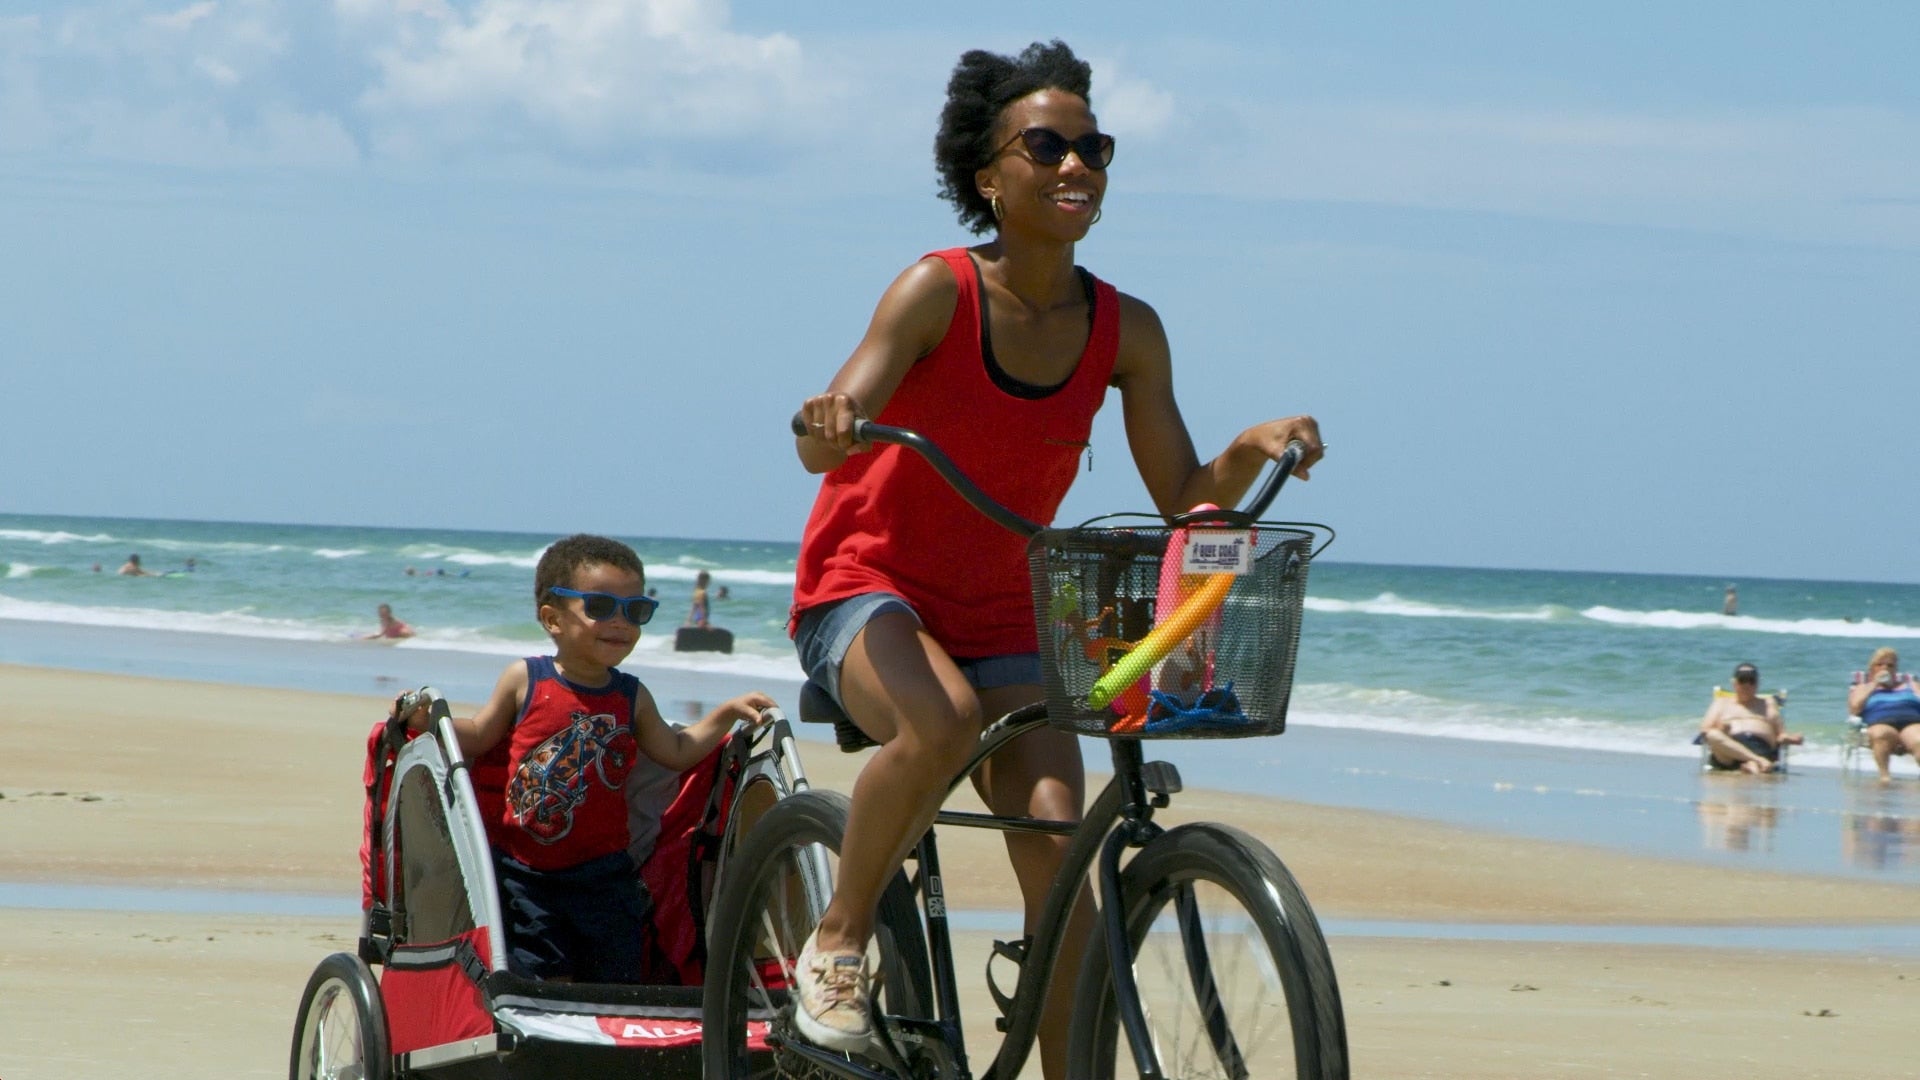 Black History Tour: 10 Family Vacation Spots In Florida